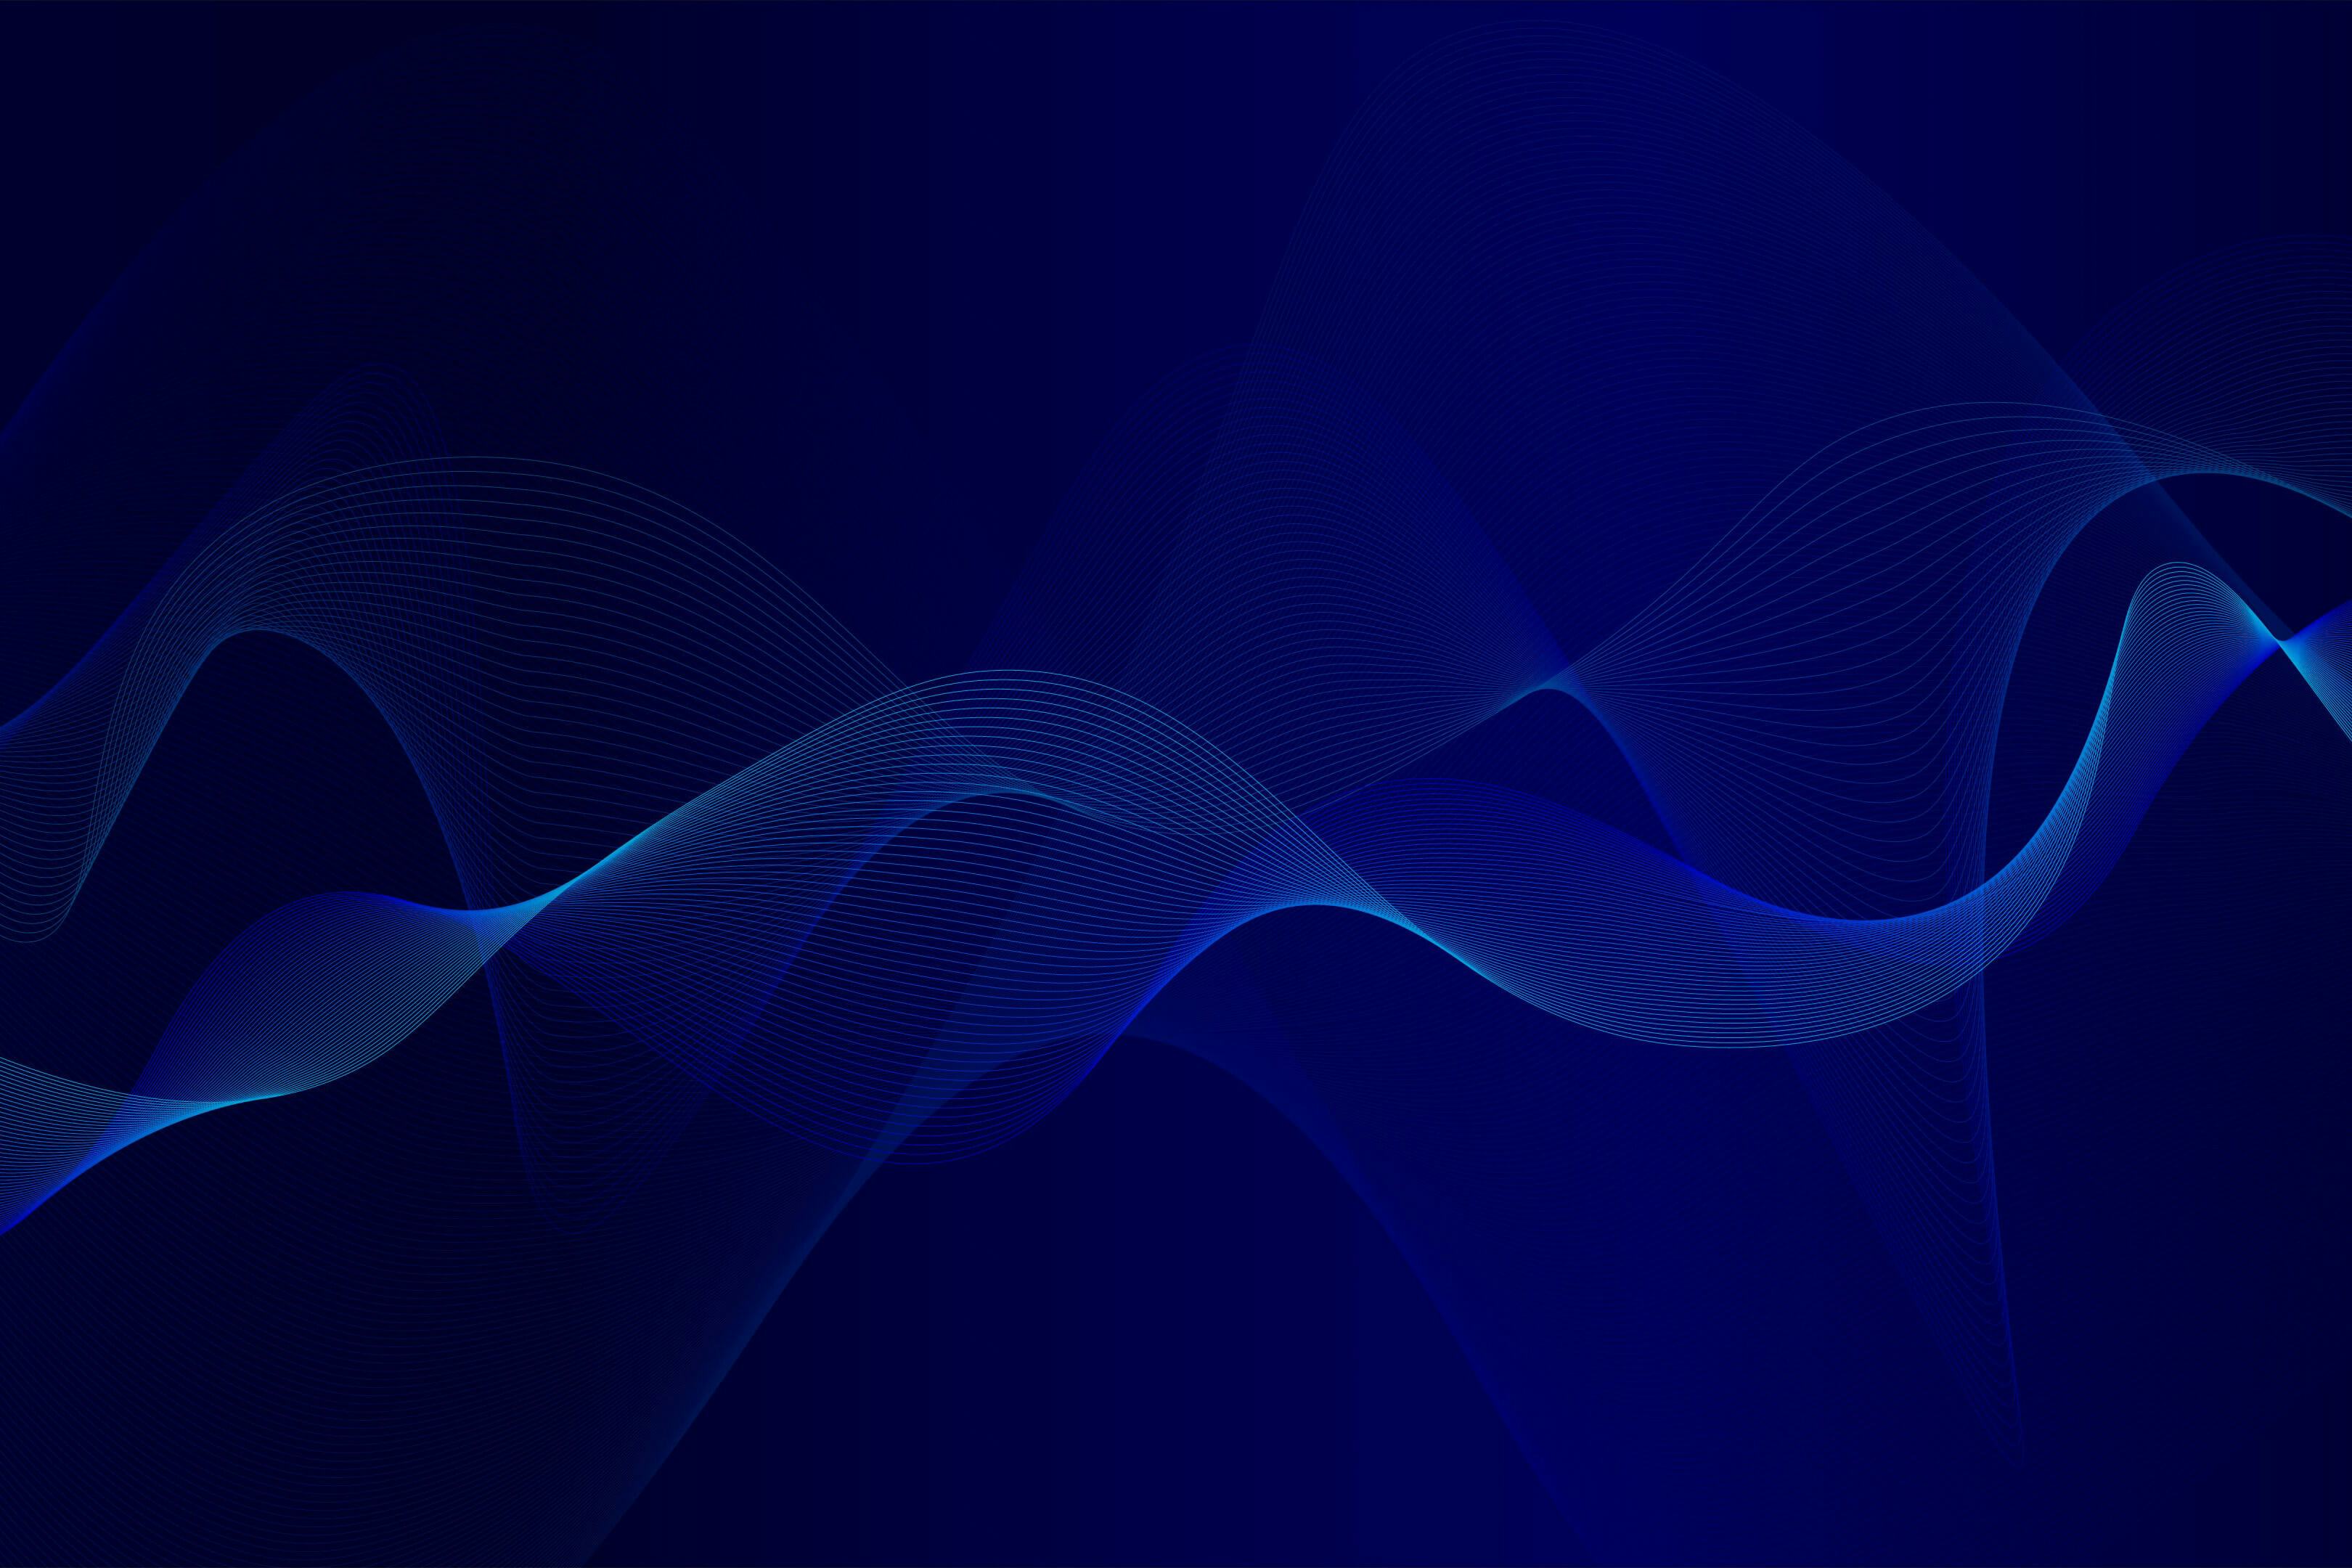 Abstract image of wavy blue lines against a dark blue background